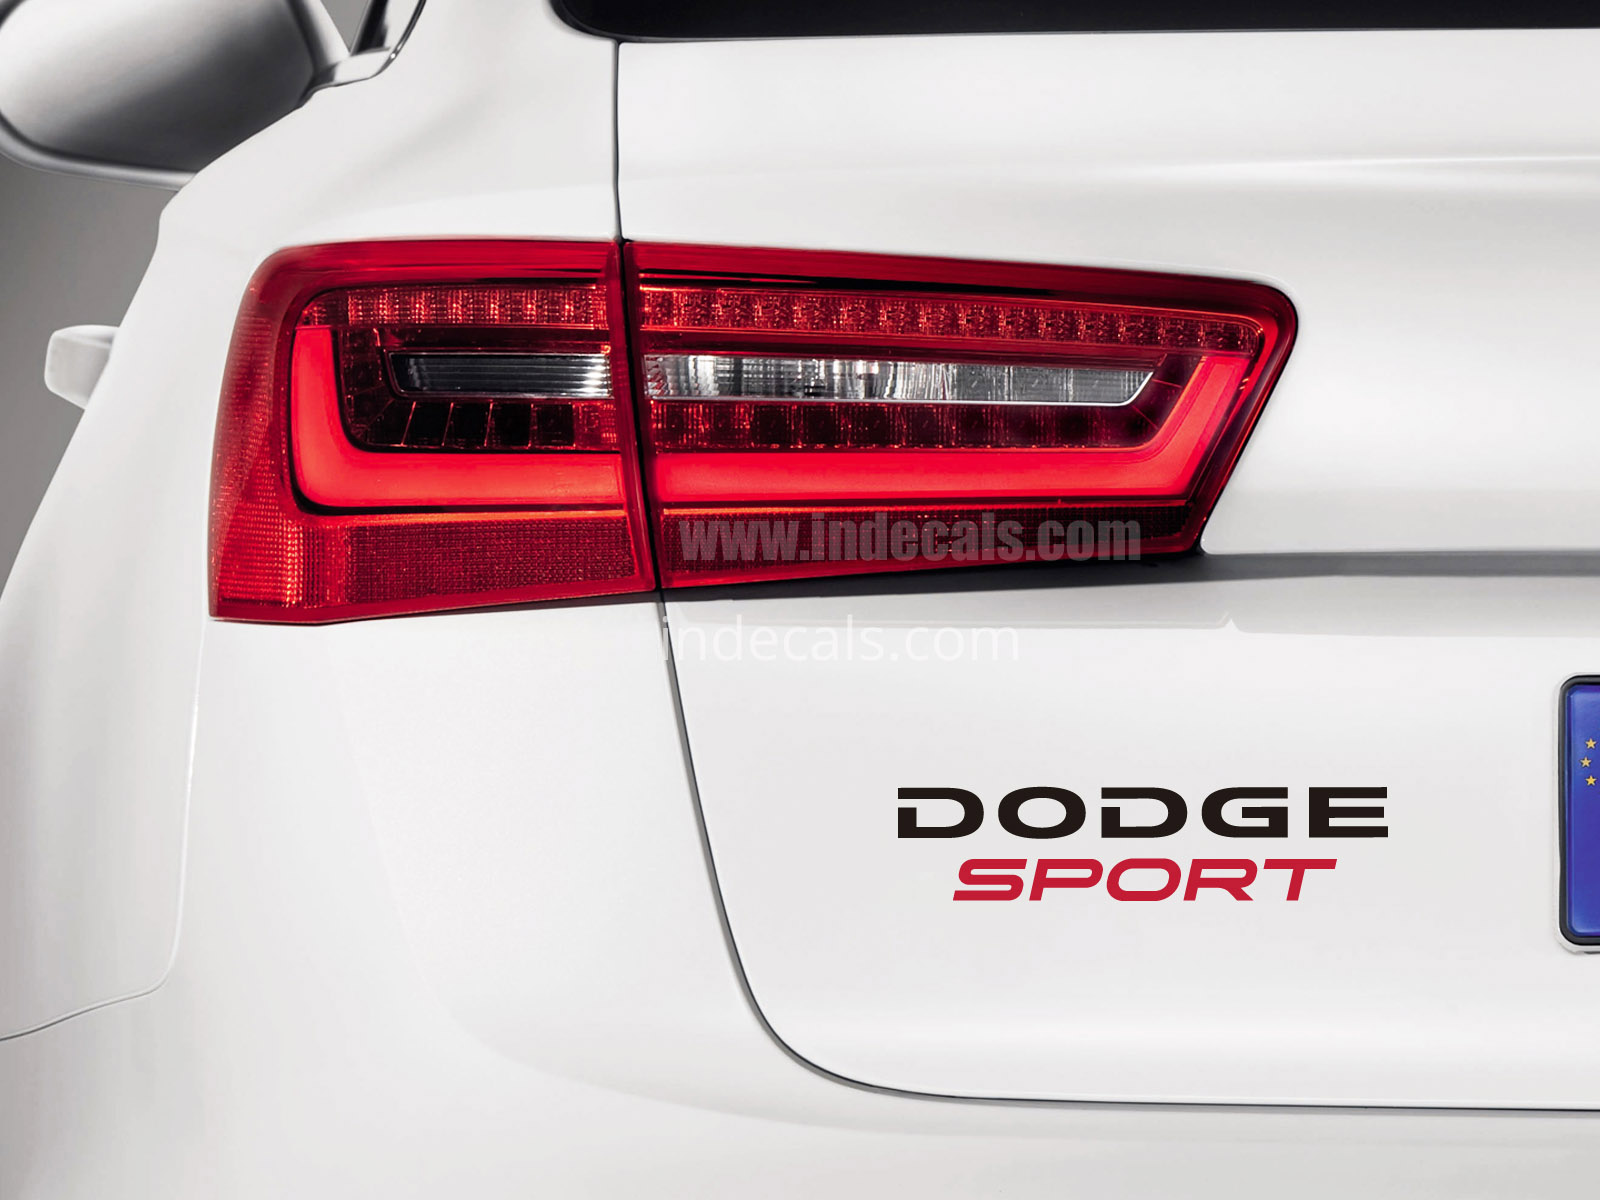 1 x Dodge Sports Sticker for Trunk - Black & Red